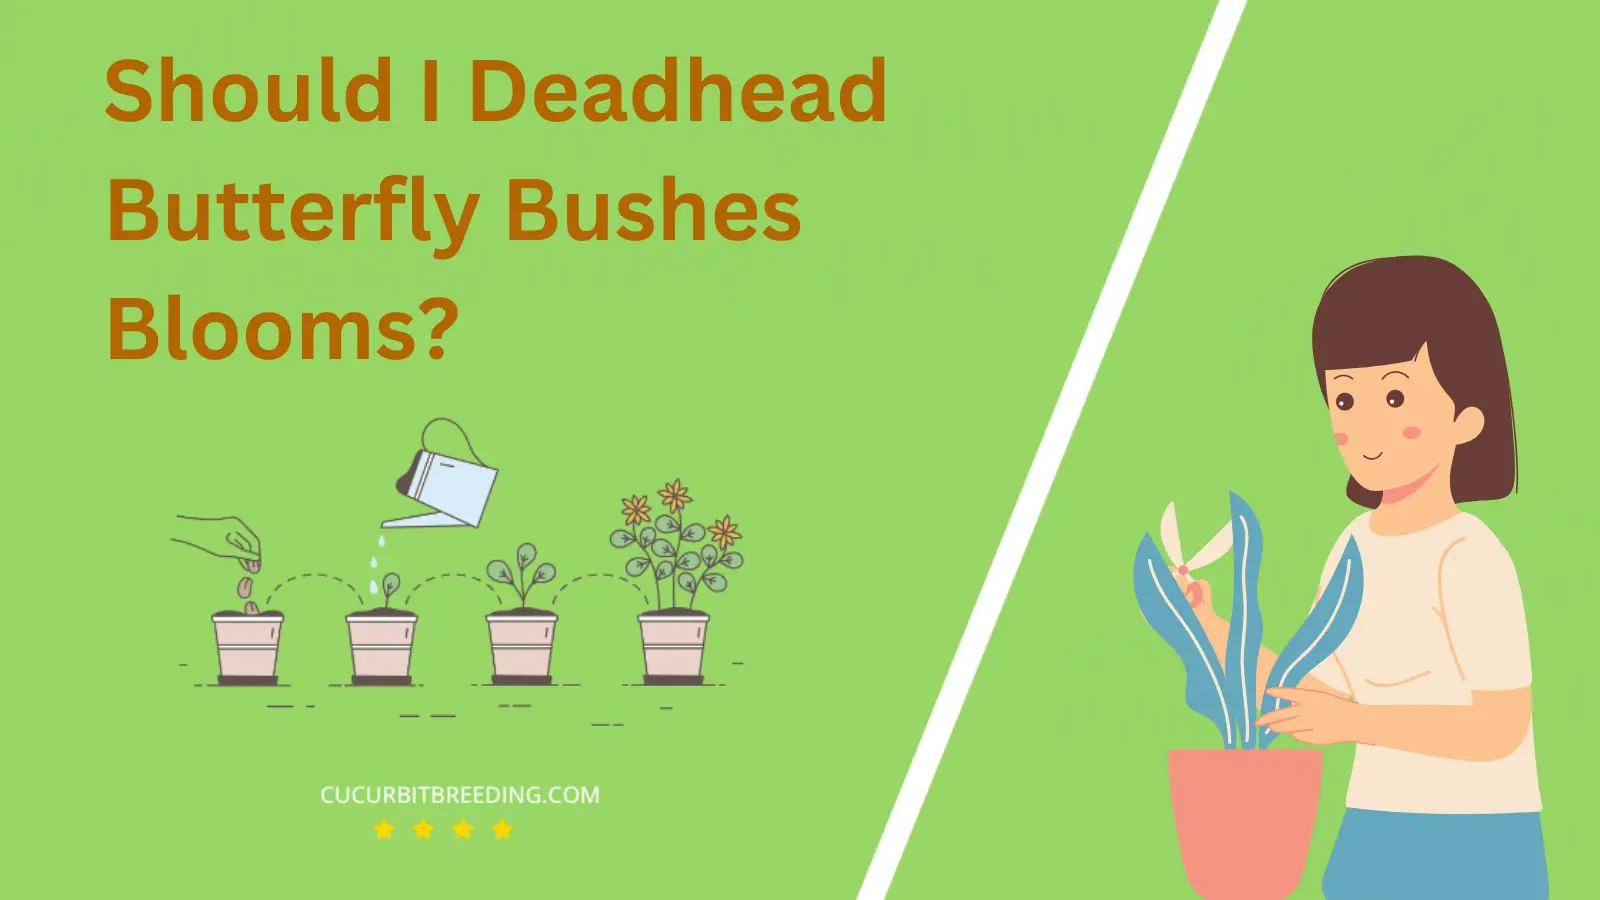 Should I Deadhead Butterfly Bushes Blooms?